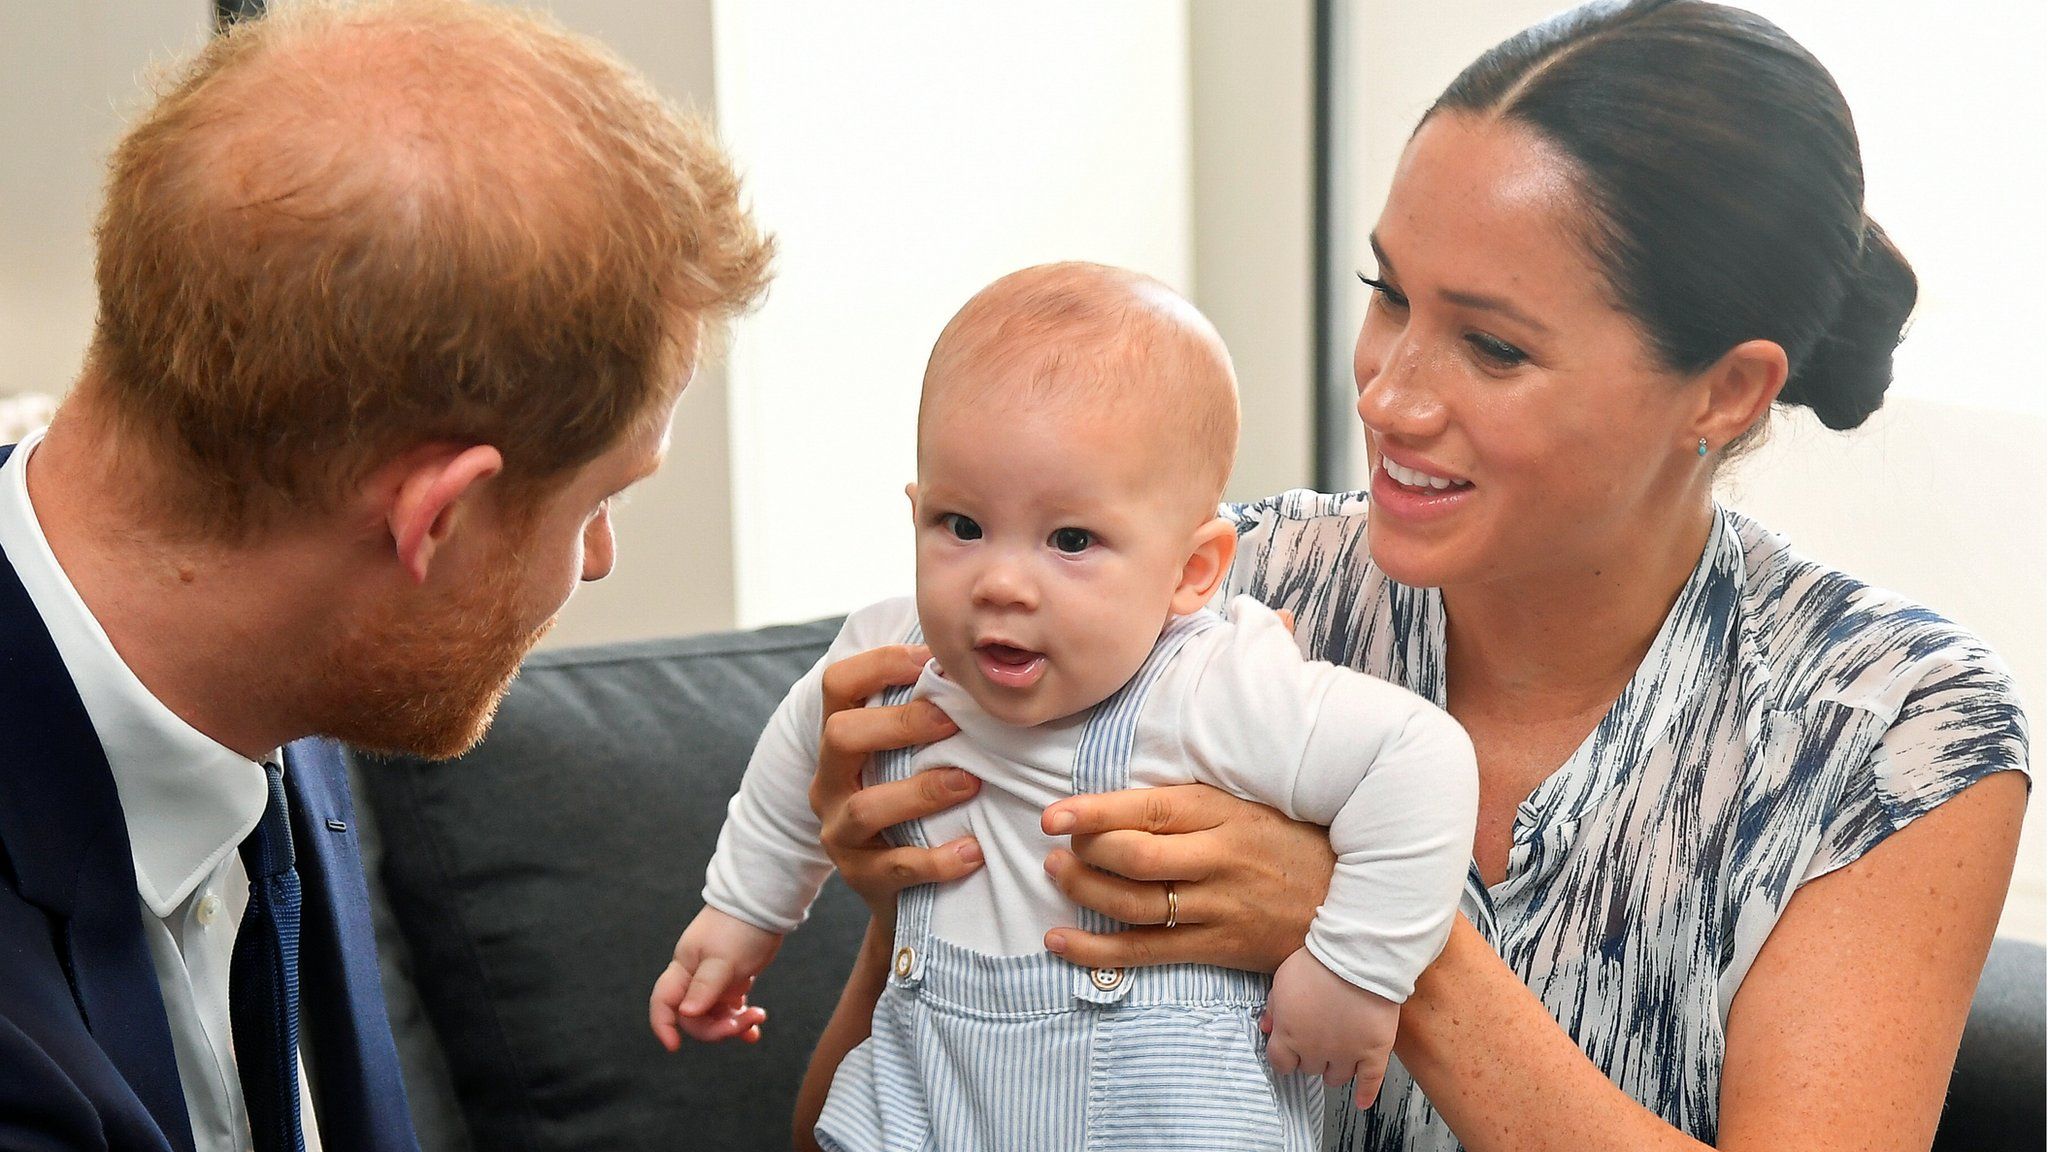 The Duke and Duchess of Sussex with their baby son, Archie.